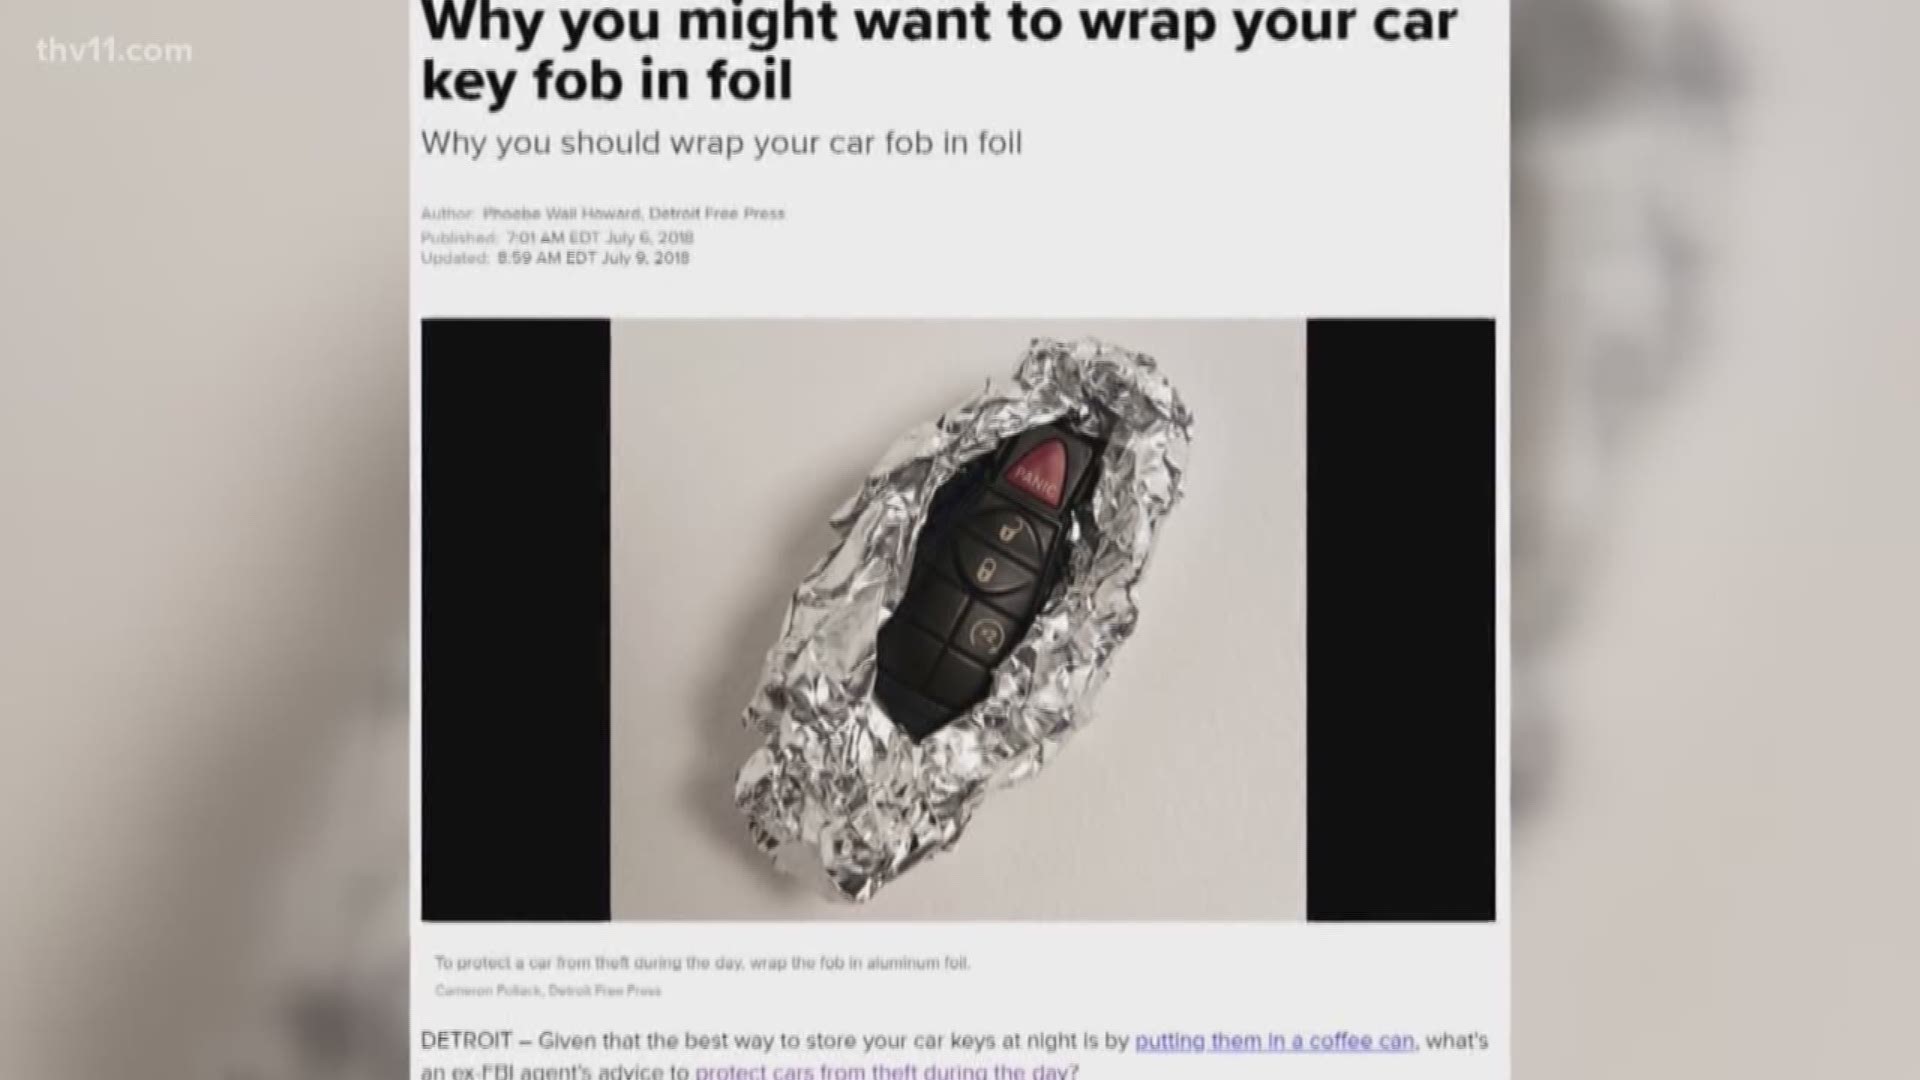 It's no secret that when the temperature drops, car thefts rise. So tonight, we verify a claim going around about the best way to protect your key fob.